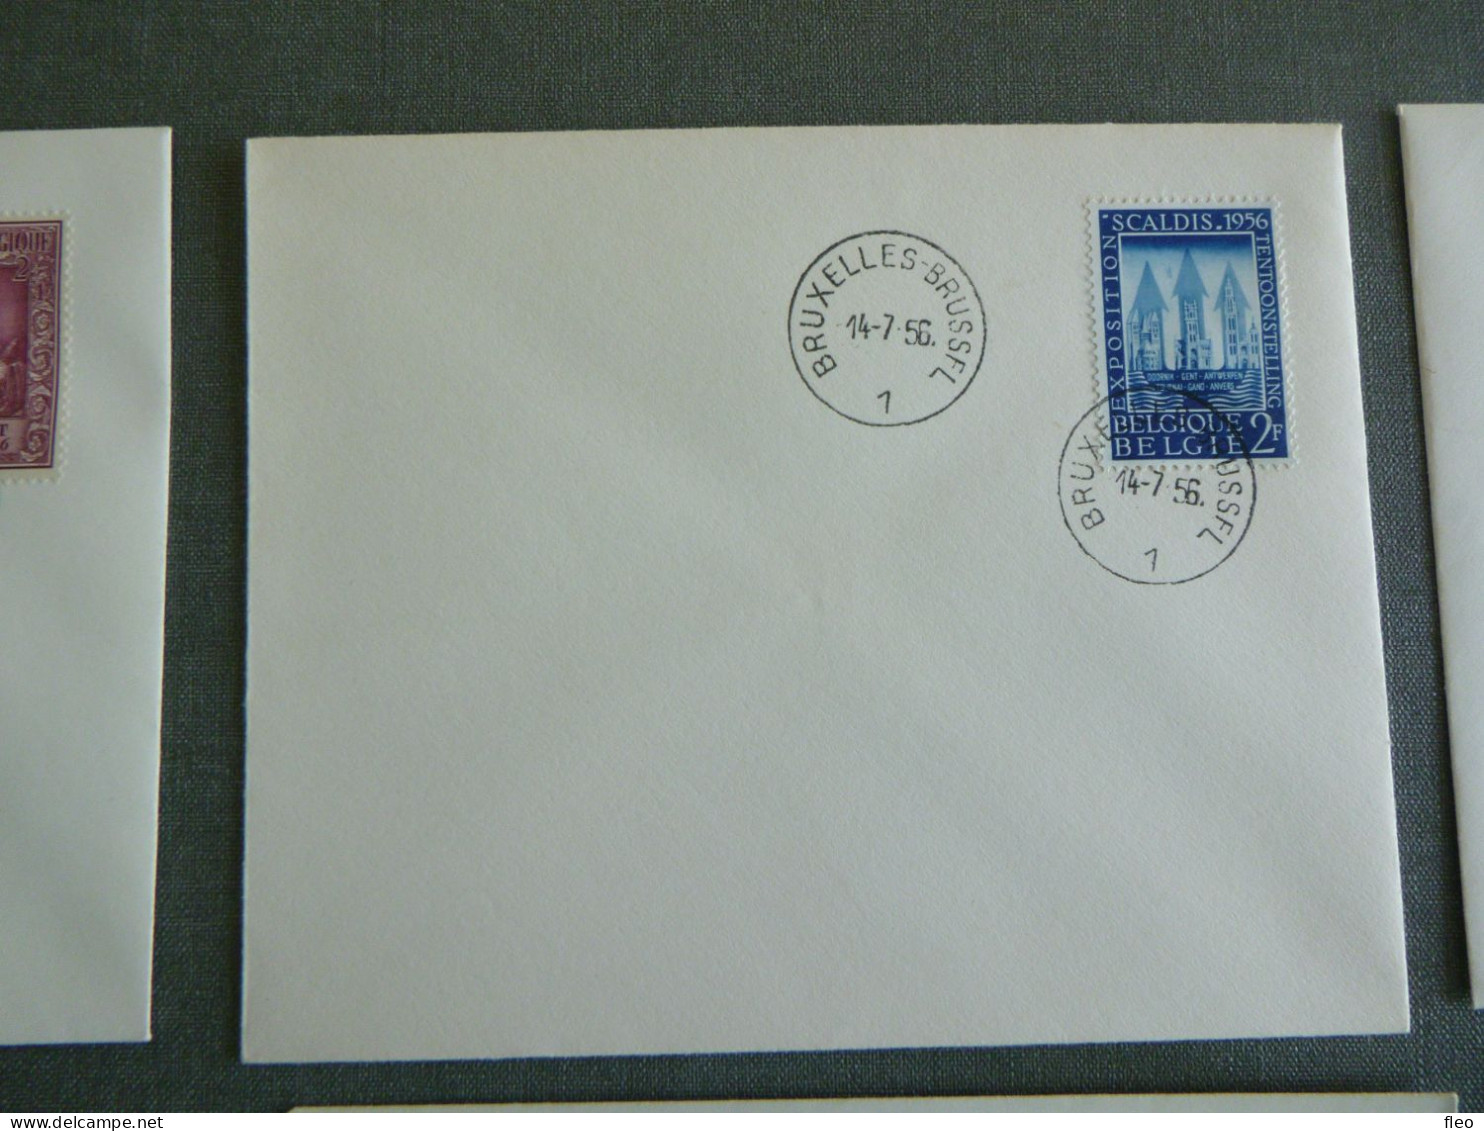 1956 987/989 & 990 & 994/995 & 996 & 997 & 998/1004 FDC's - 1951-1960